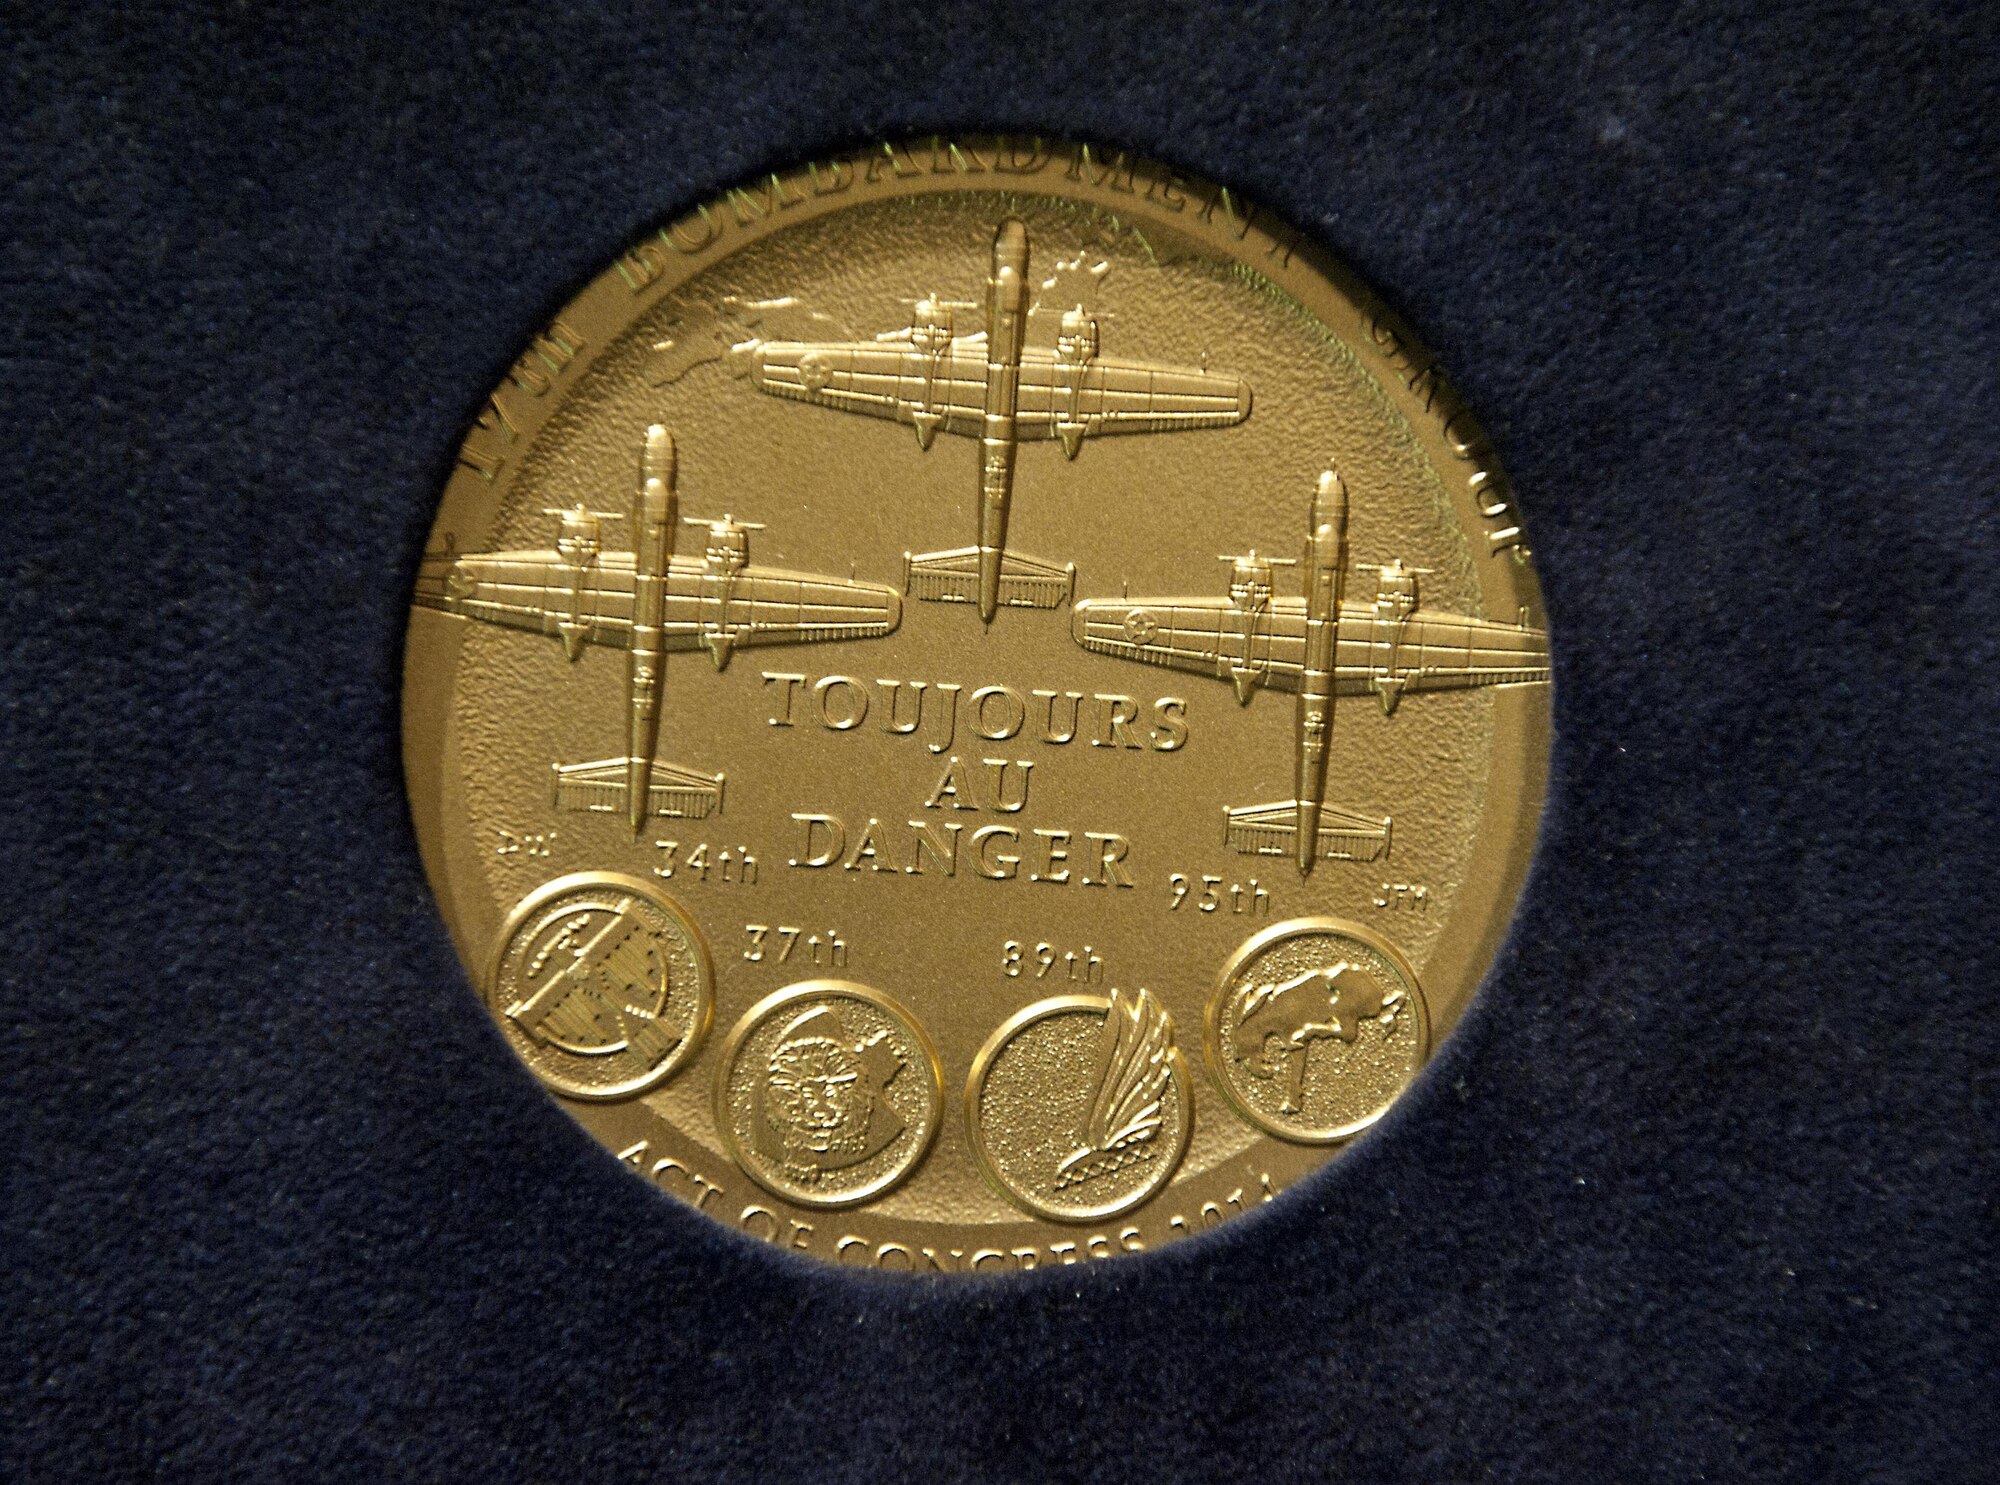 The Congressional Gold Medal was presented to the Doolittle Tokyo Raiders April 15, 2015, at the U.S. Capitol Visitor’s Center Emancipation Hall. The medal, created by the U.S. Mint, is the highest civilian honor Congress can give, on behalf of the American people, and was presented in recognition of the Doolittle Tokyo Raiders’ outstanding heroism and service to the U.S. during World War II. (U.S. Air Force photo/Tech. Sgt. Anthony Nelson)